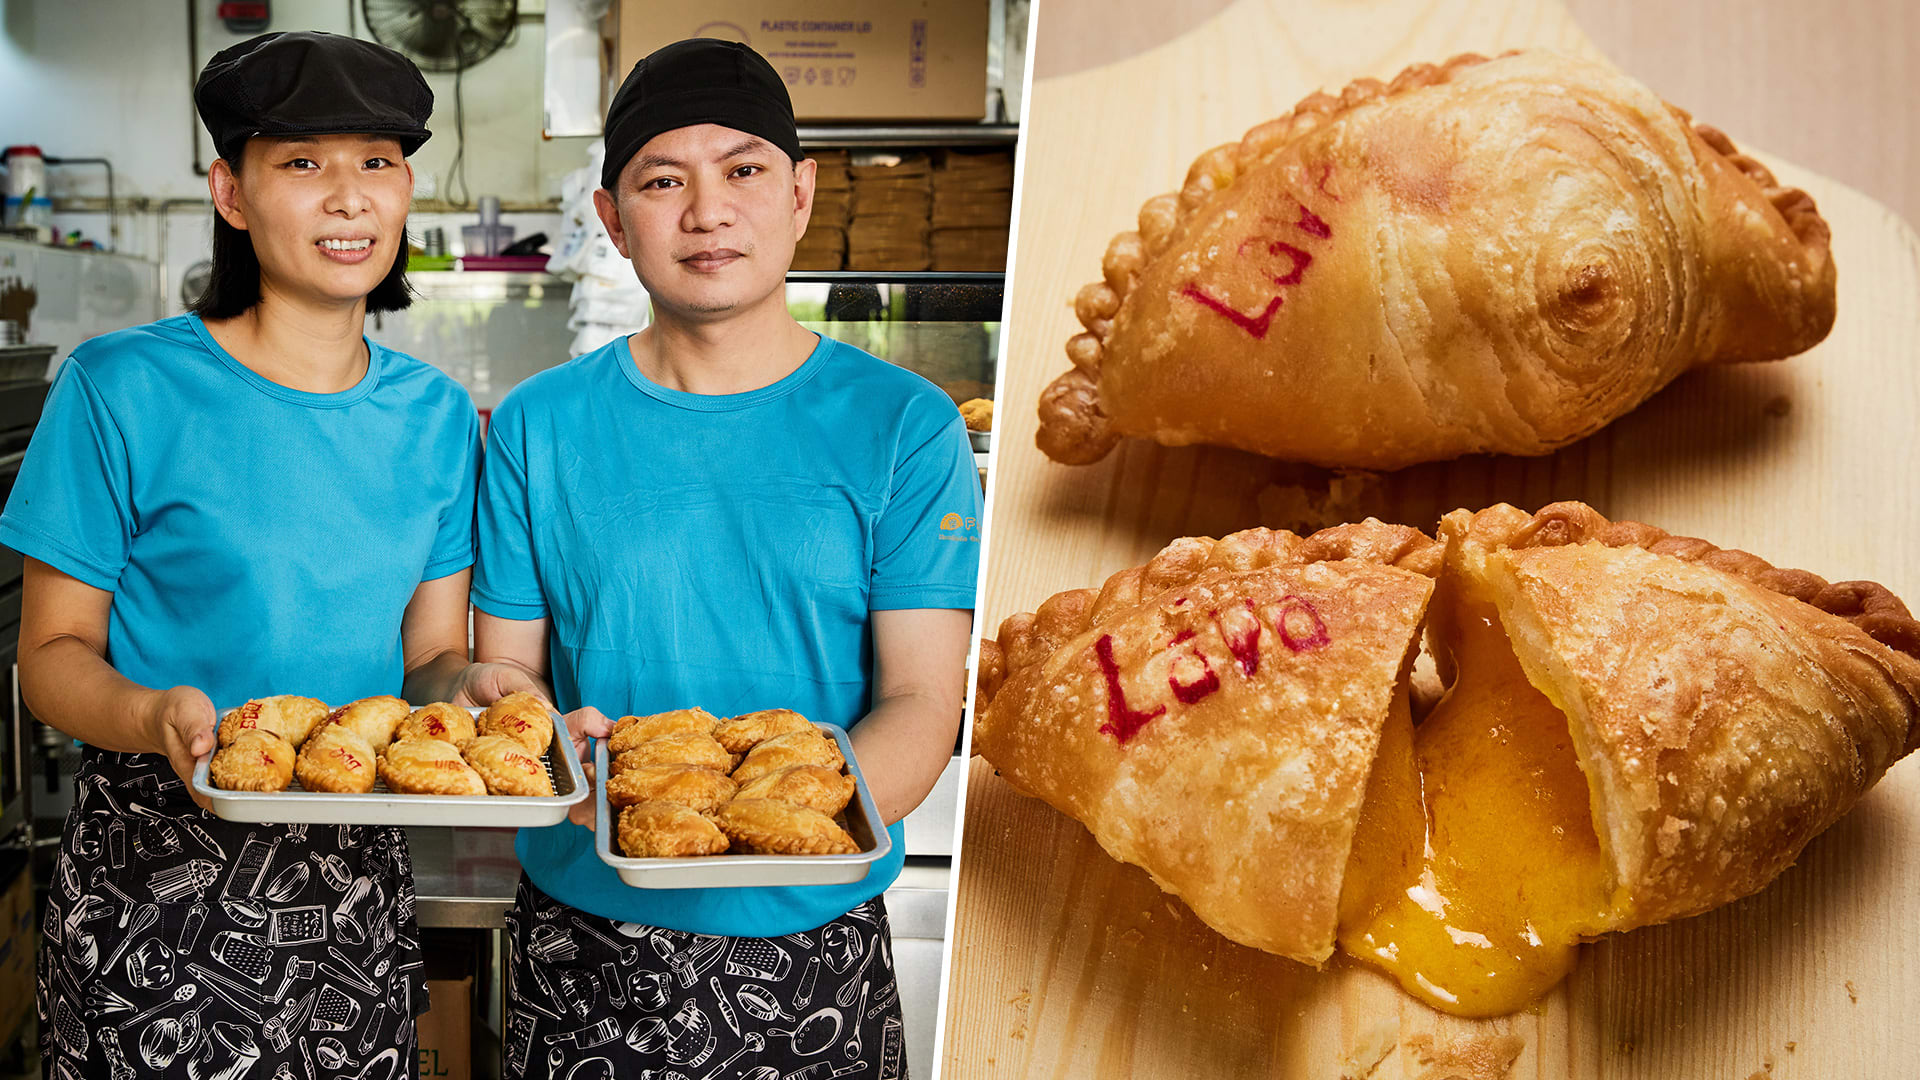 Delish Salted Egg “Lava” & Curry Puffs From $1.40 At Ubi Industrial Estate Hawker Stall